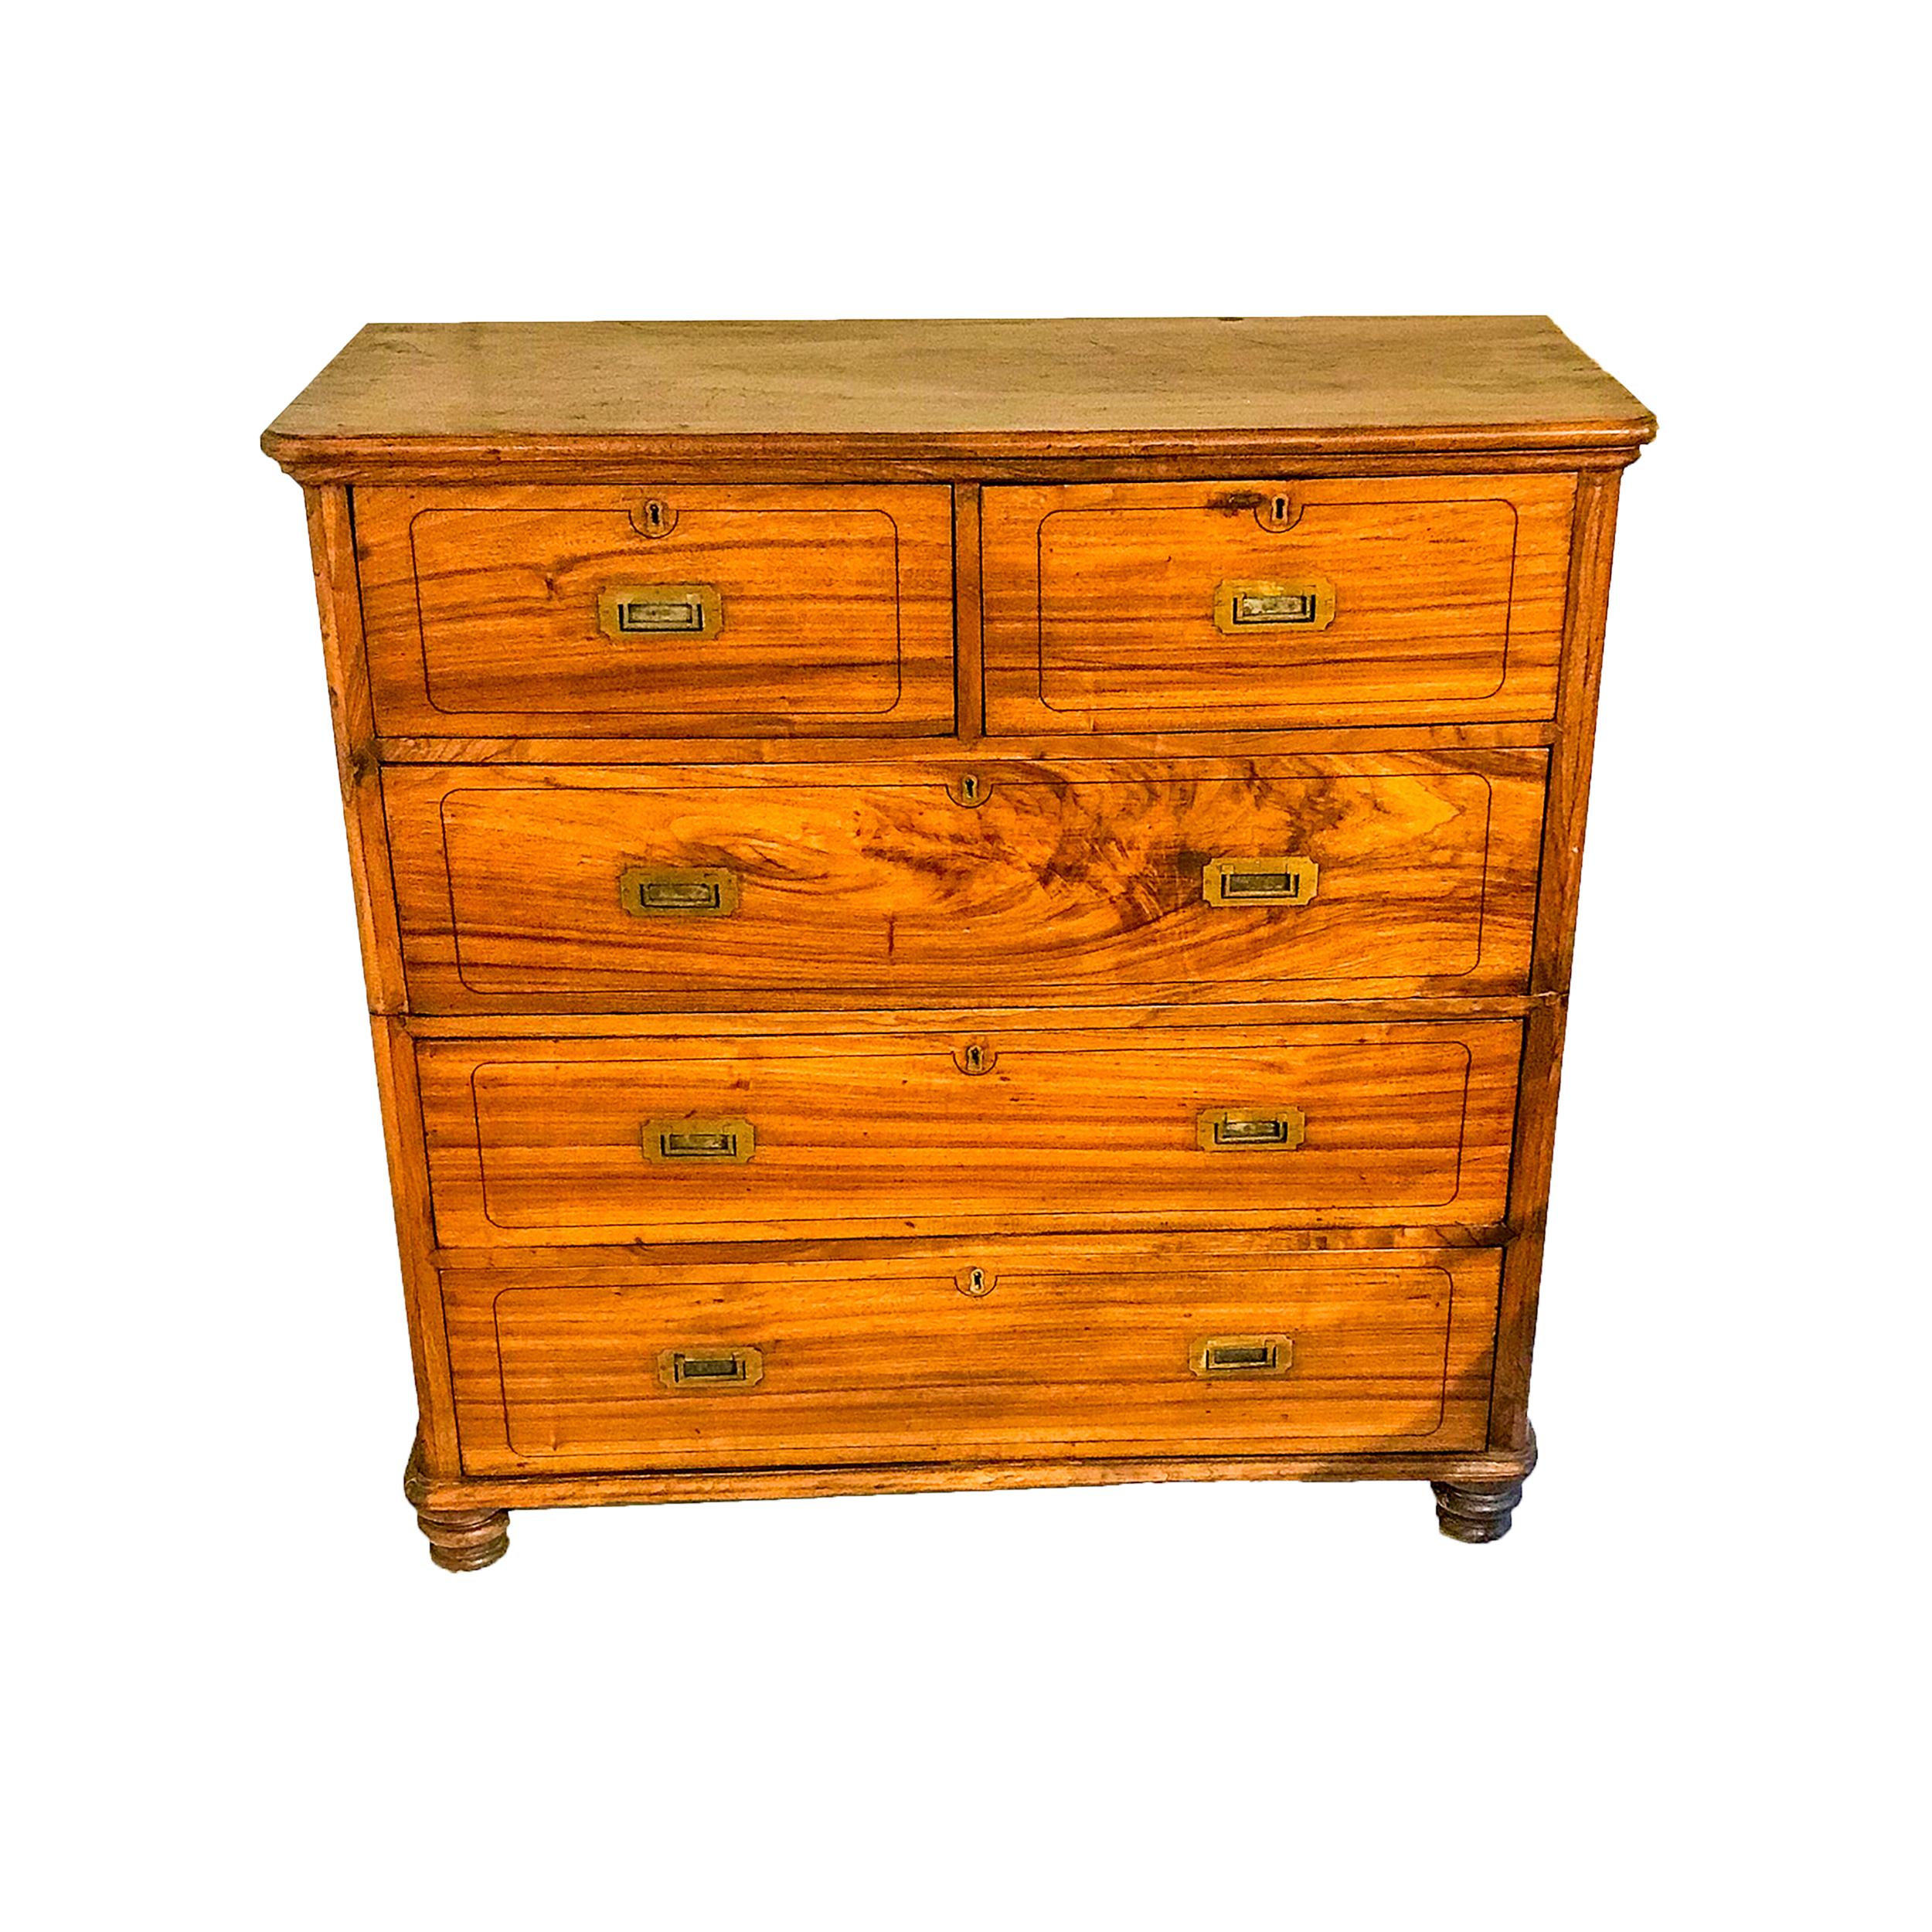 Campaign Chinese Export Camphor Wood Brass Bound Chest